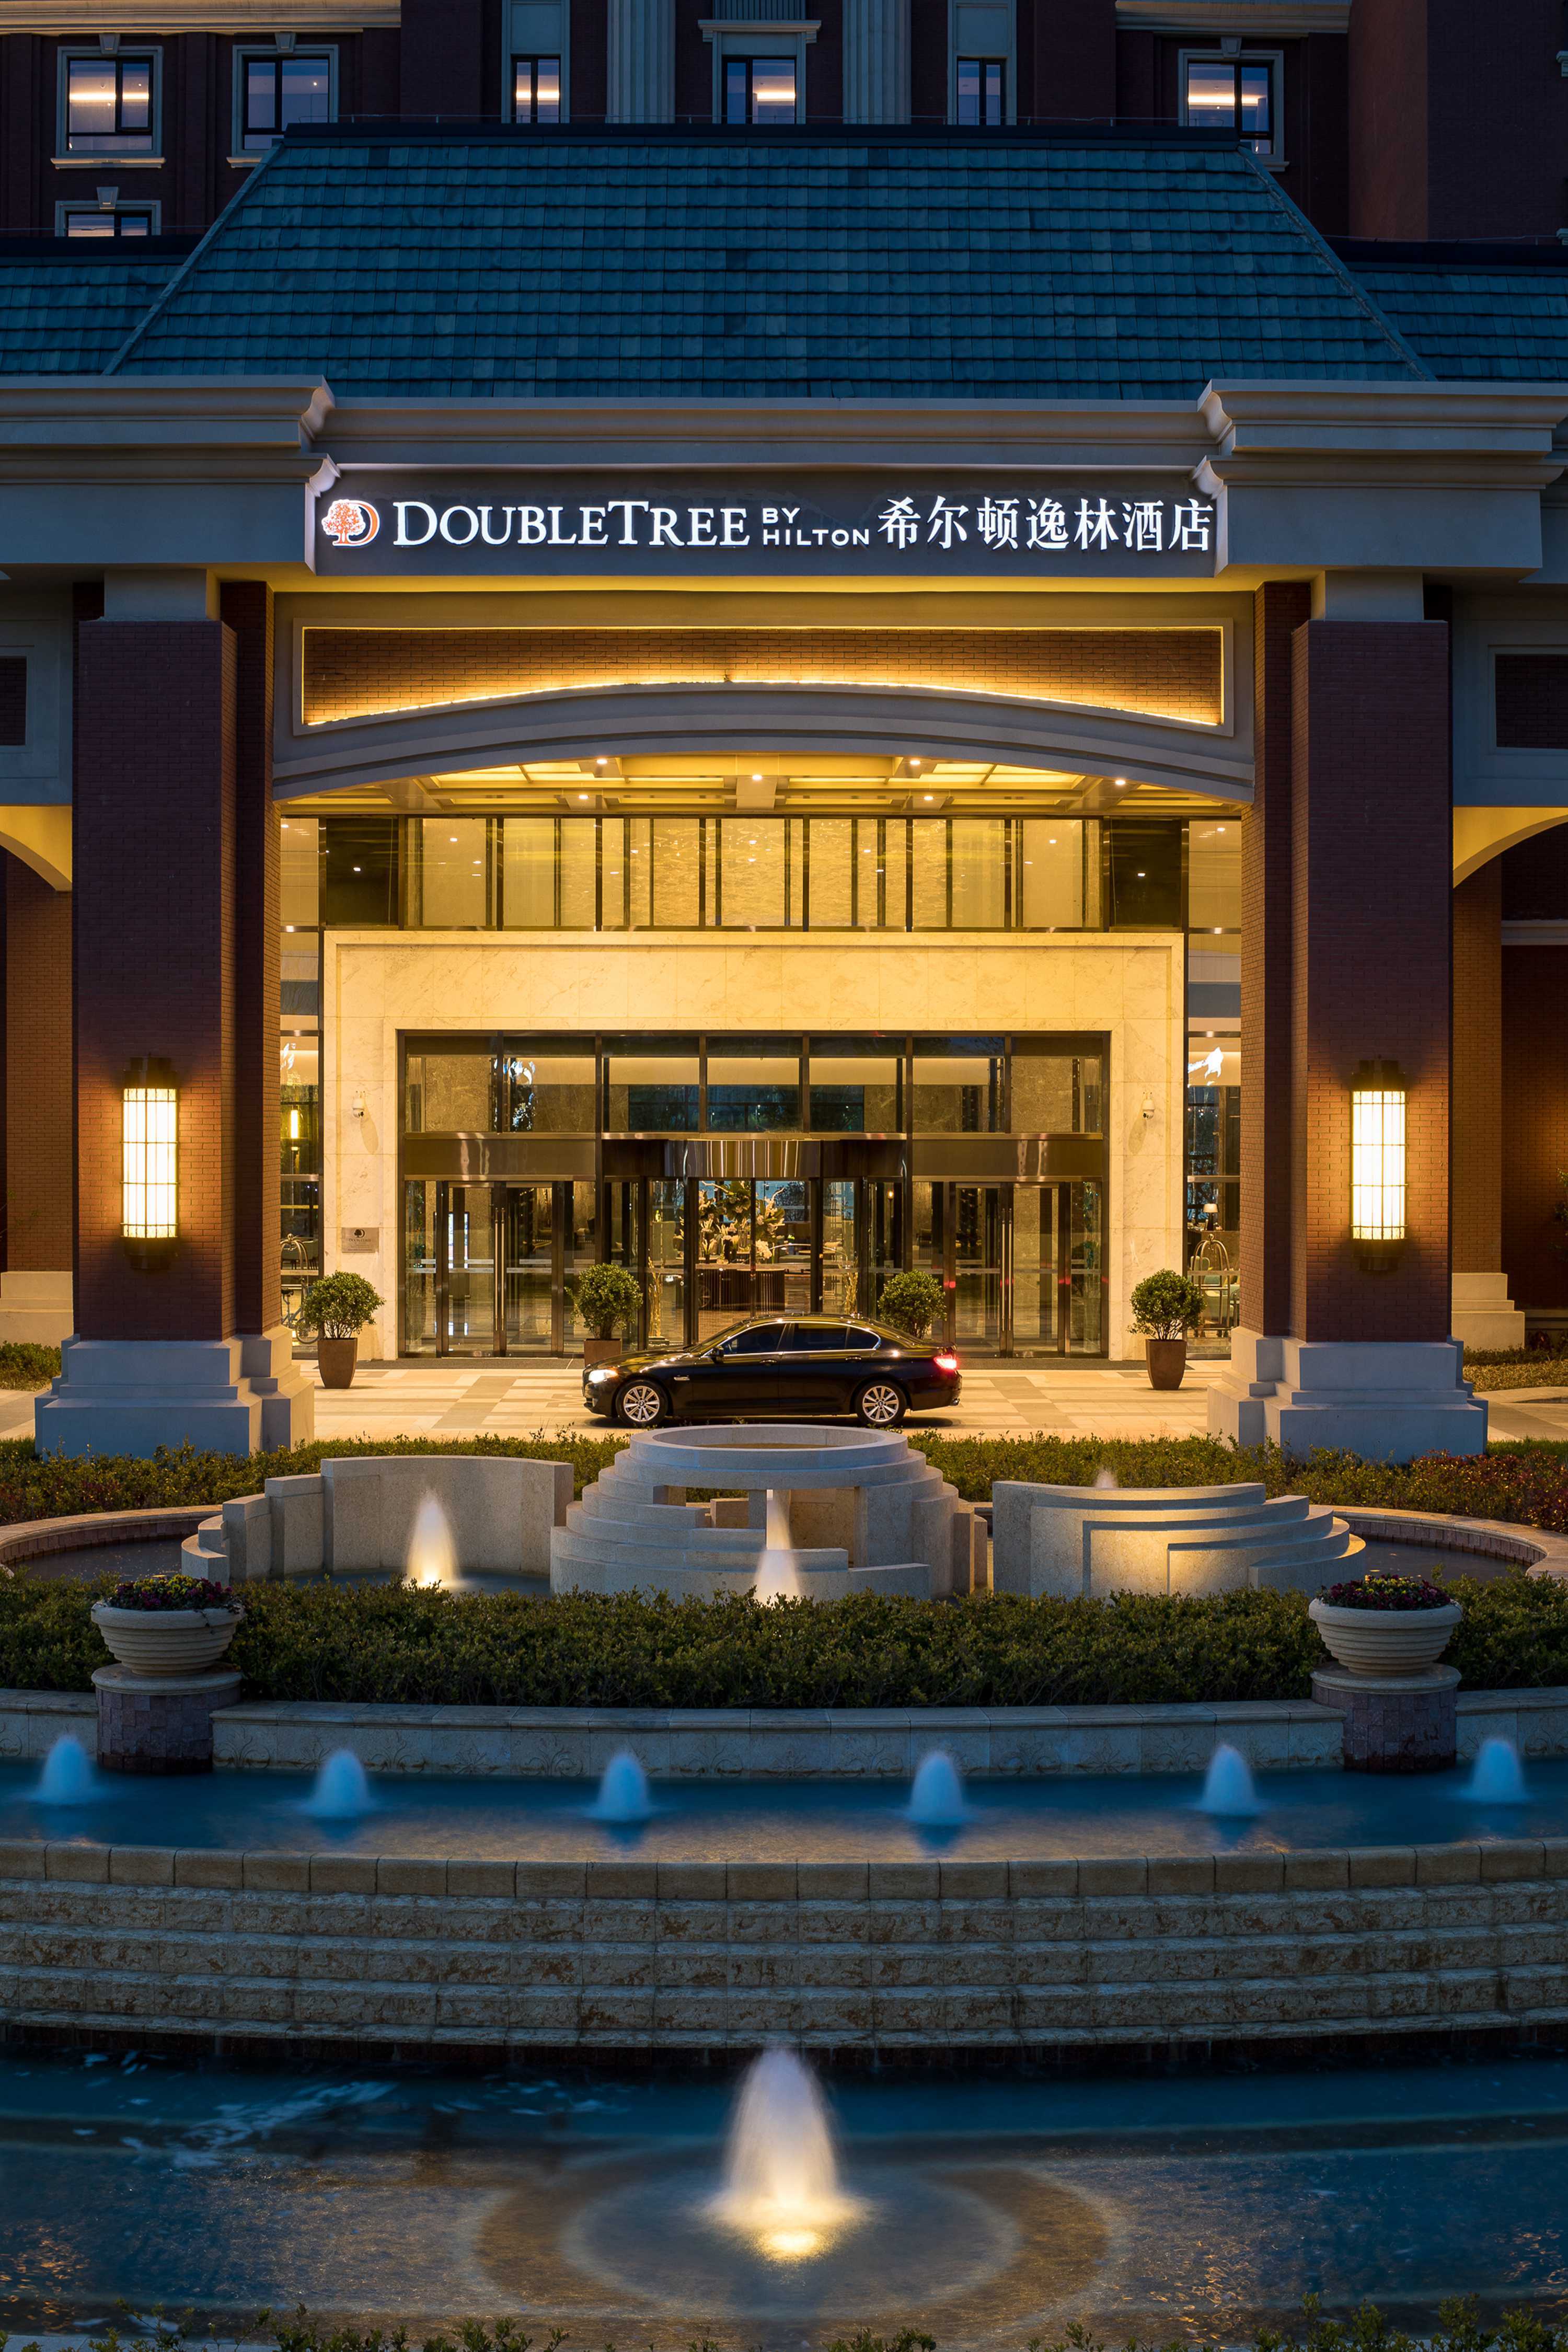 Hotel Fountain and Entrance